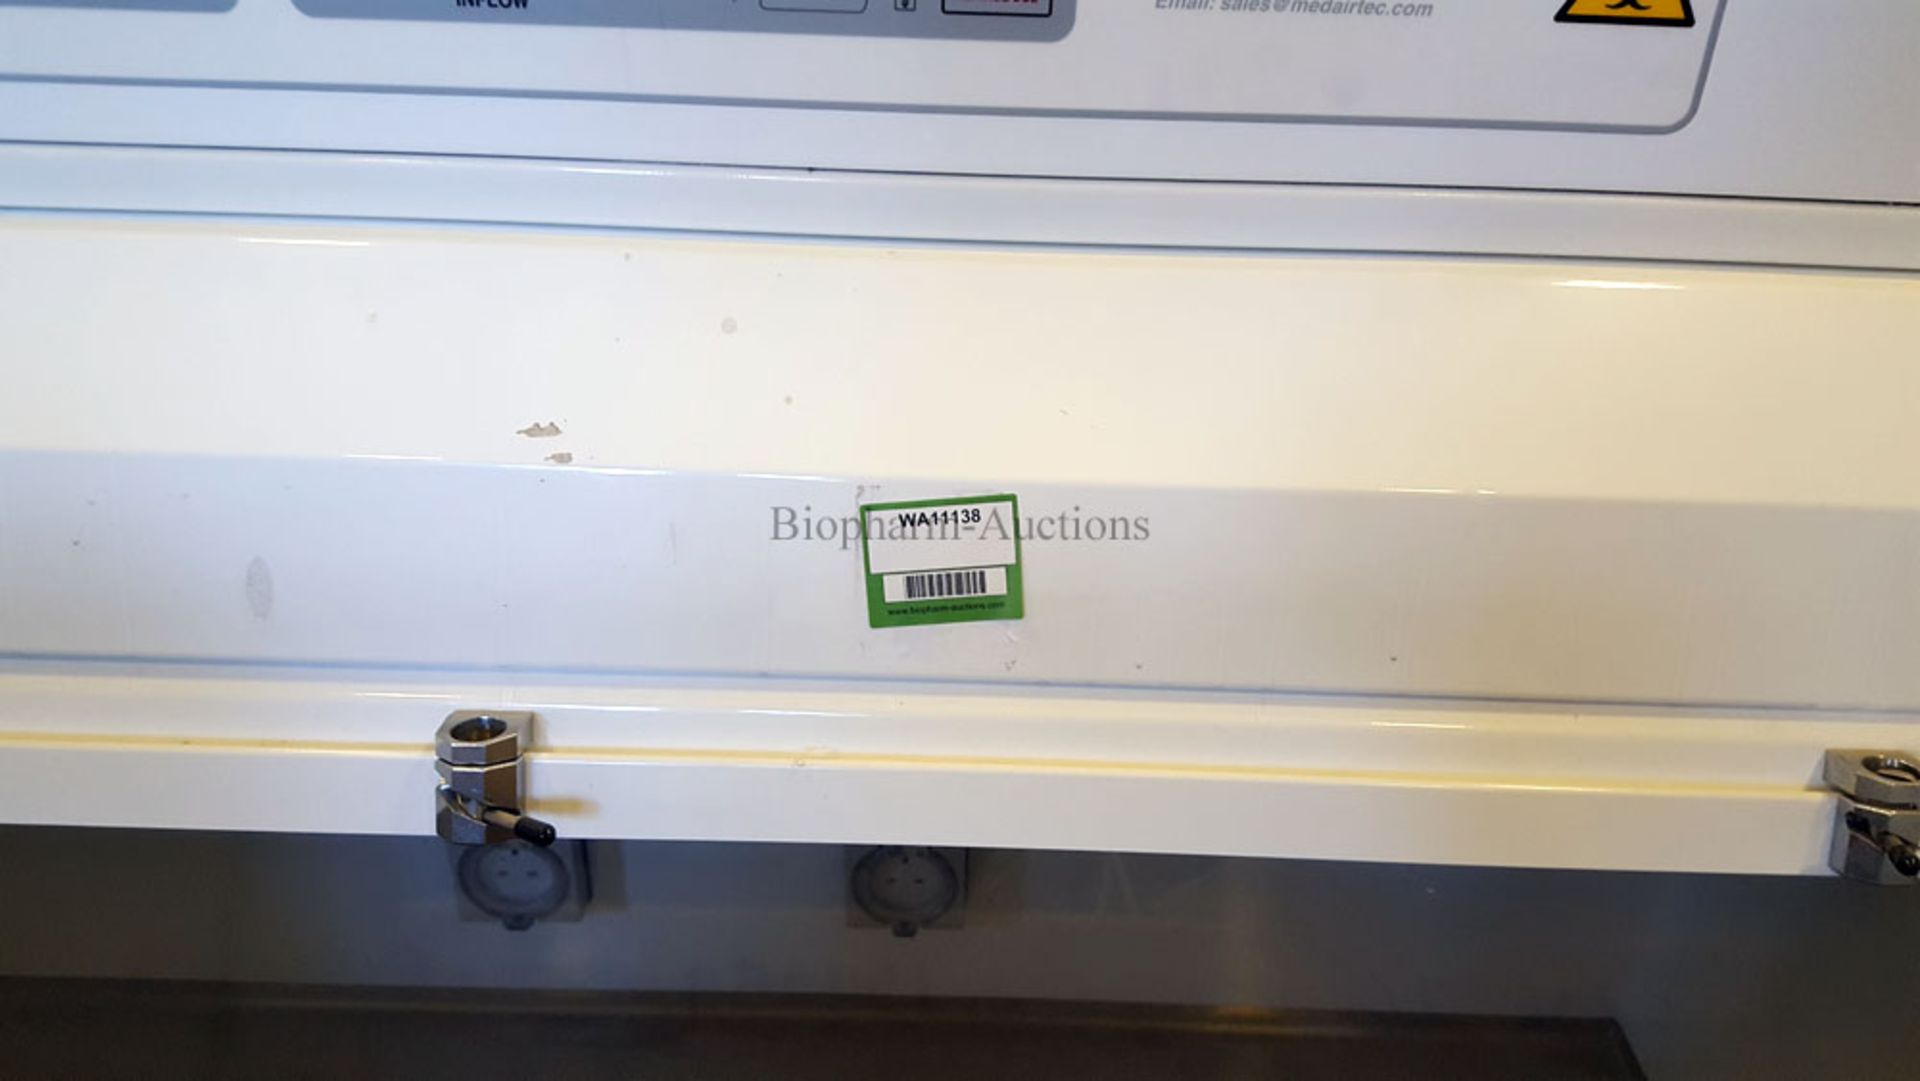 BioMAT Class 1 Microbiological safety cabinet, serial number MC 4789-74 (Ref: WA11138) - Image 7 of 8